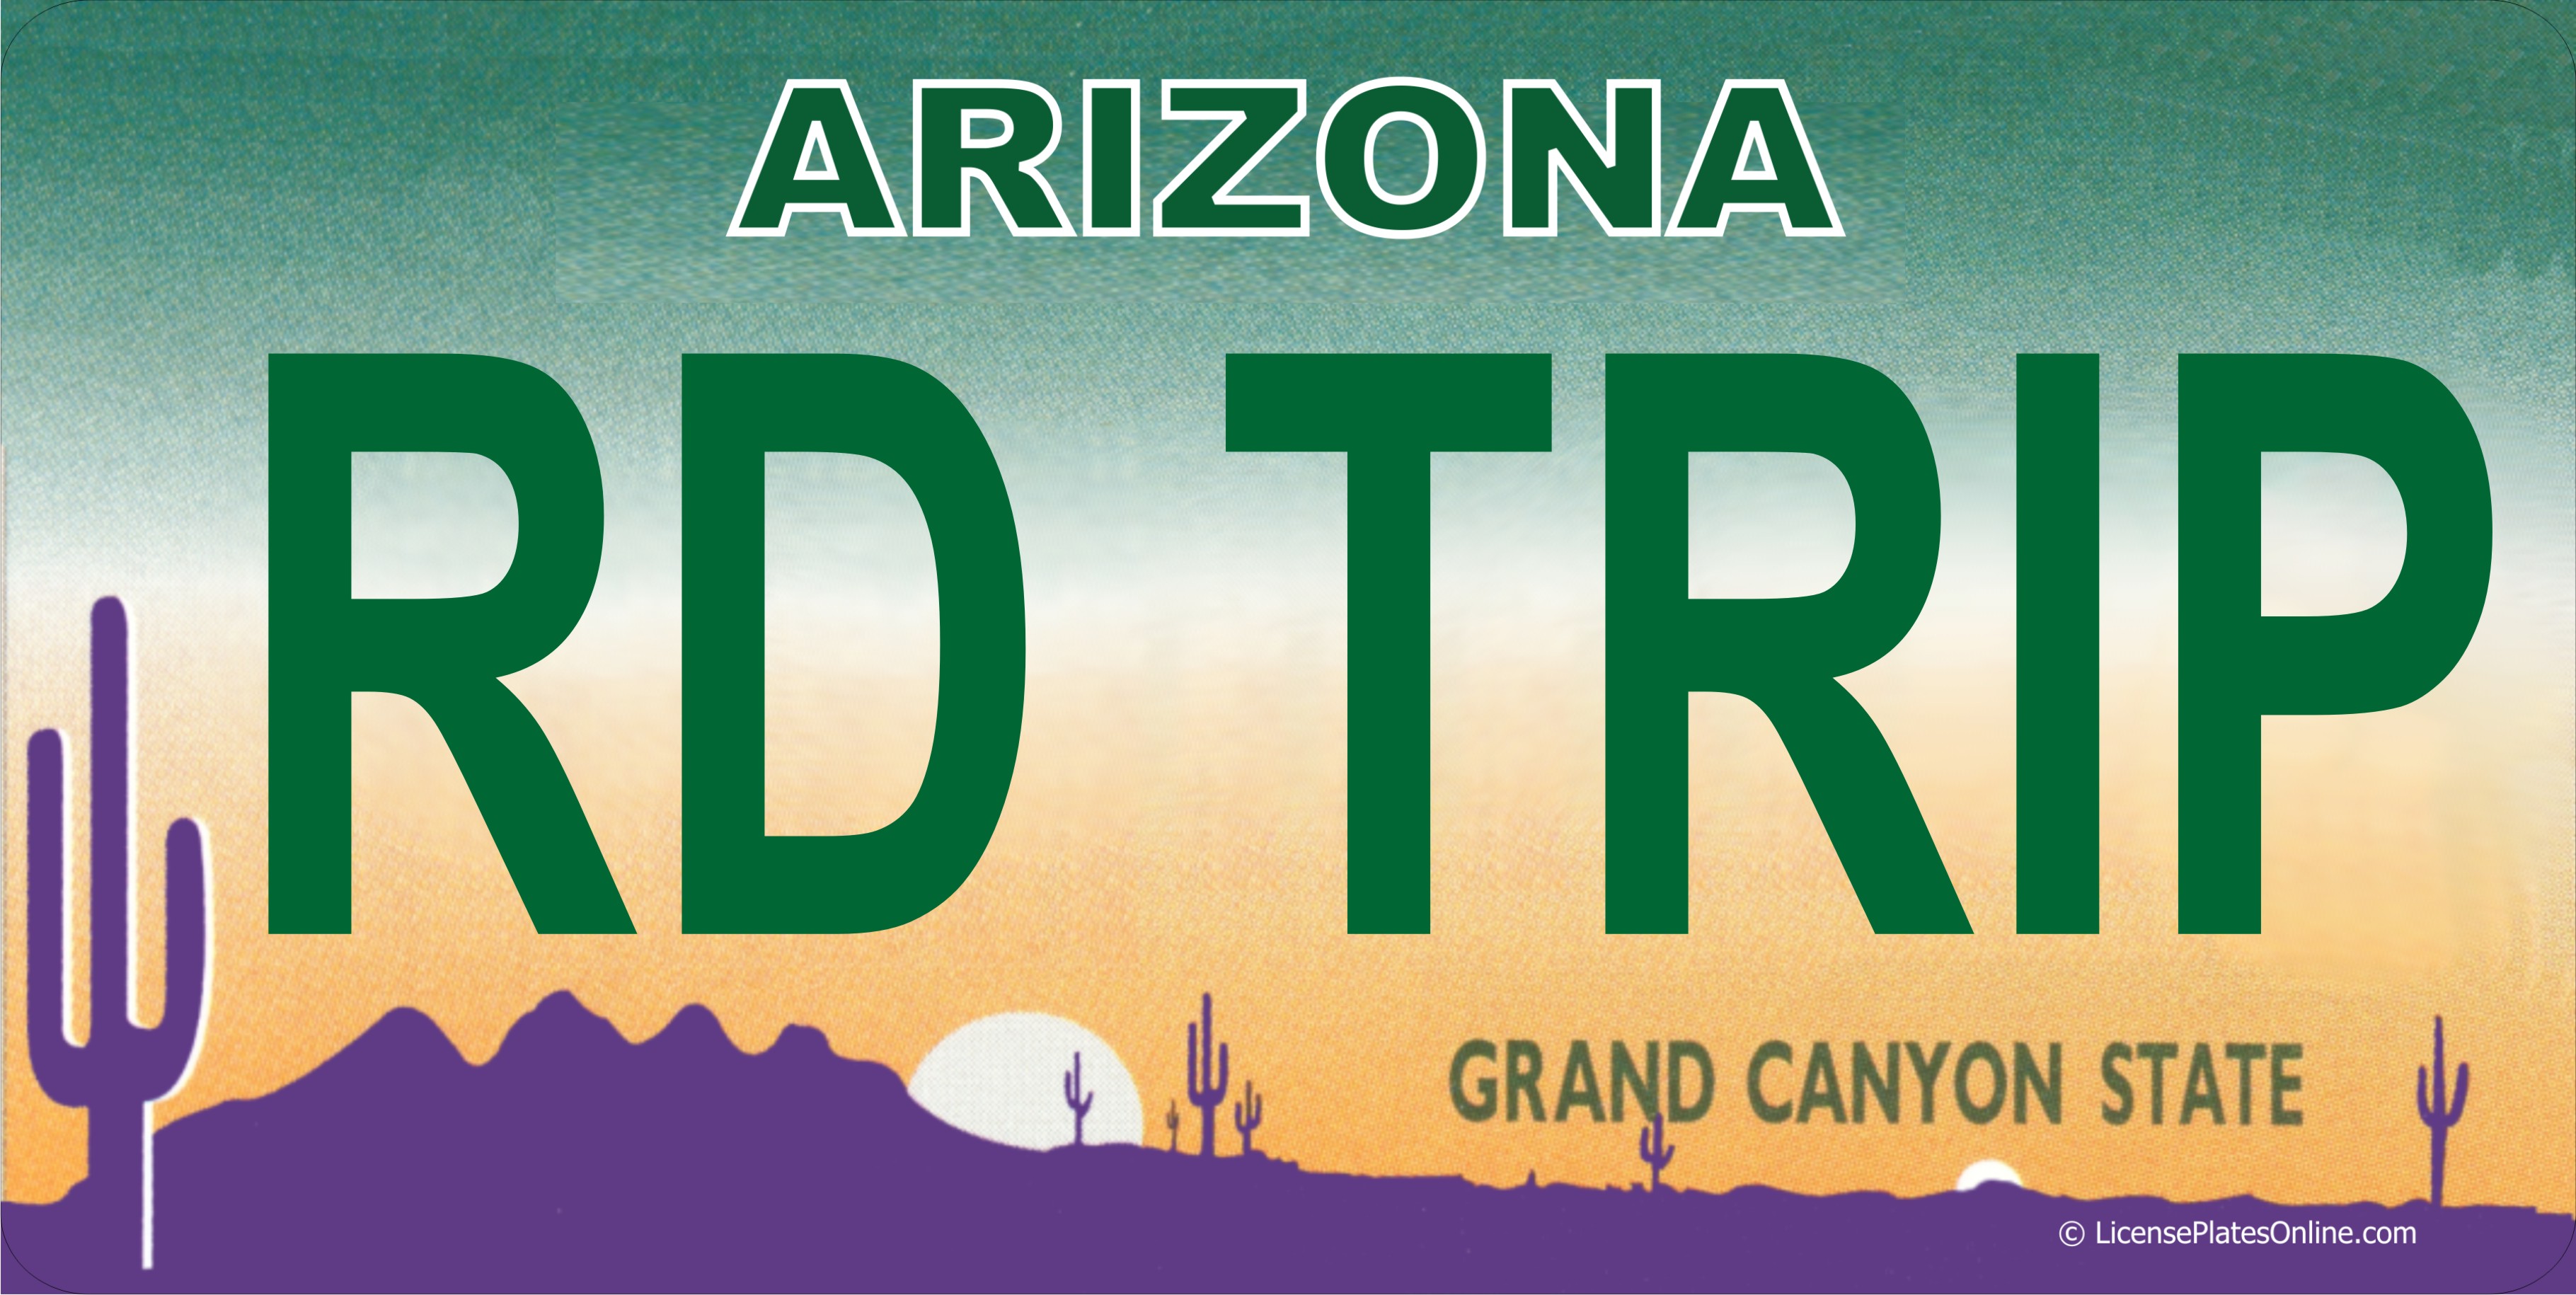 Arizona RD TRIP Photo LICENSE PLATE  Free Personalization on this PLATE